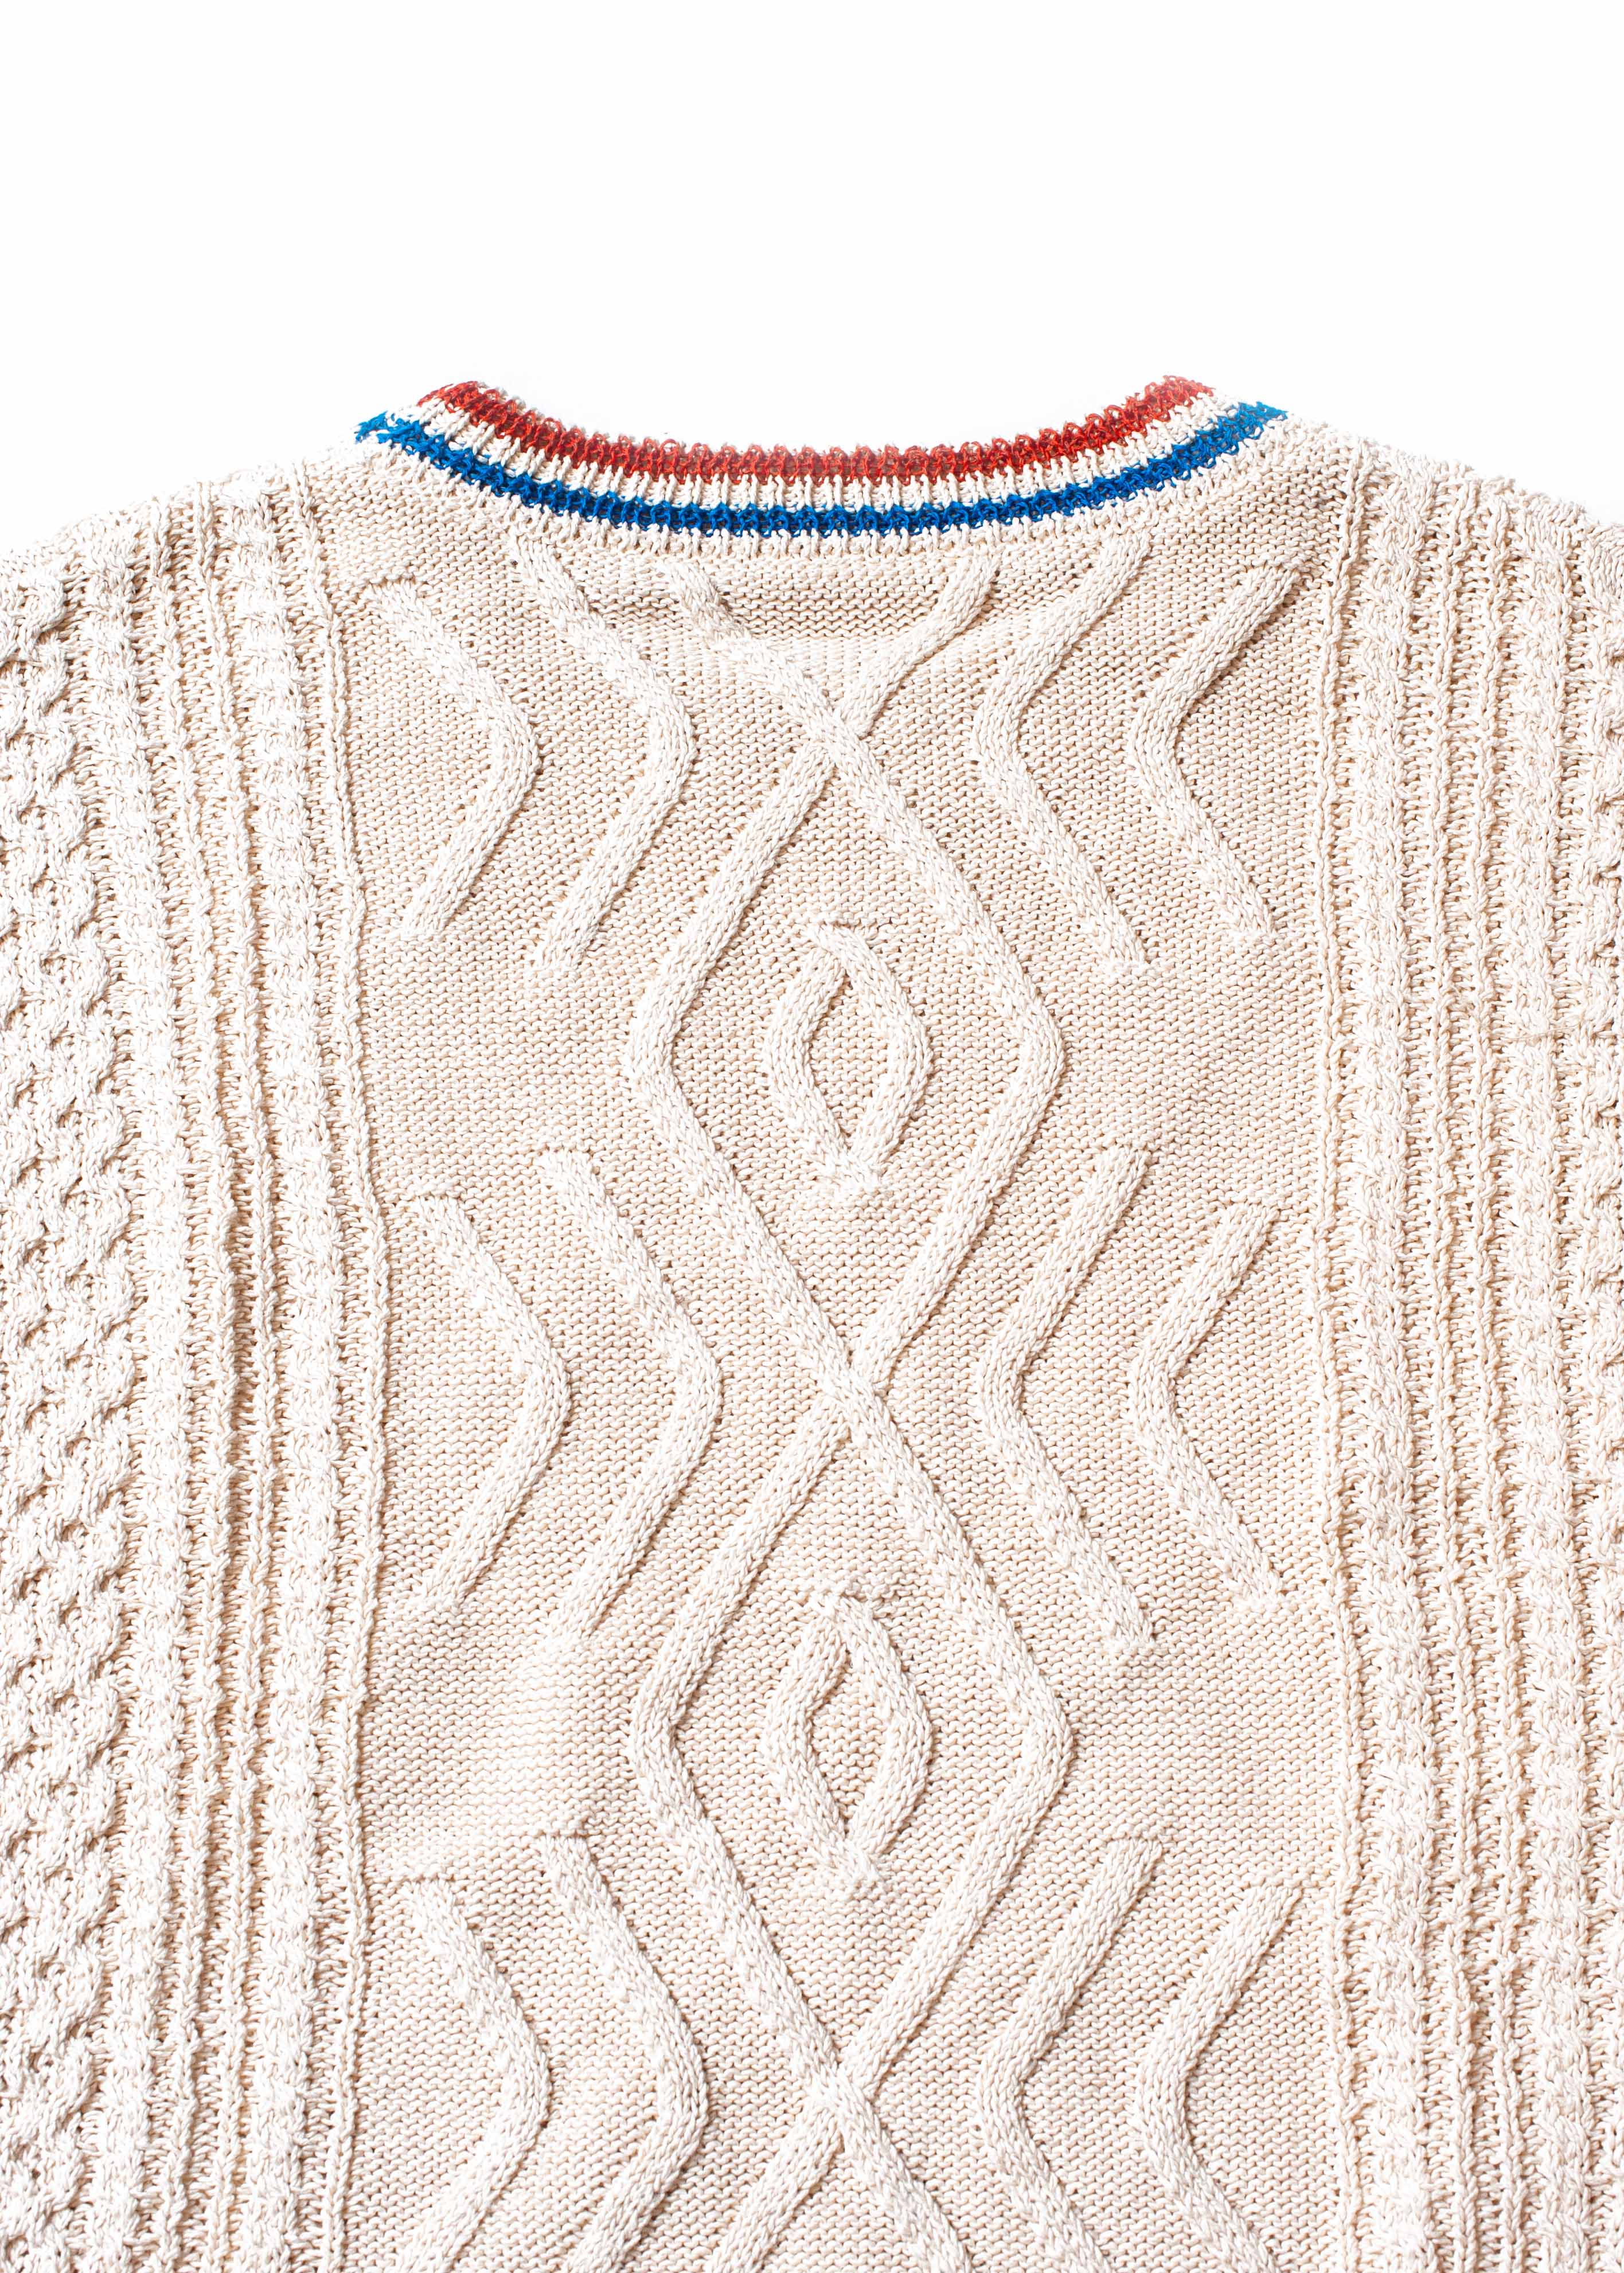 KN-SV-NNS-1001 / Japanese Paper Pullover cable knit